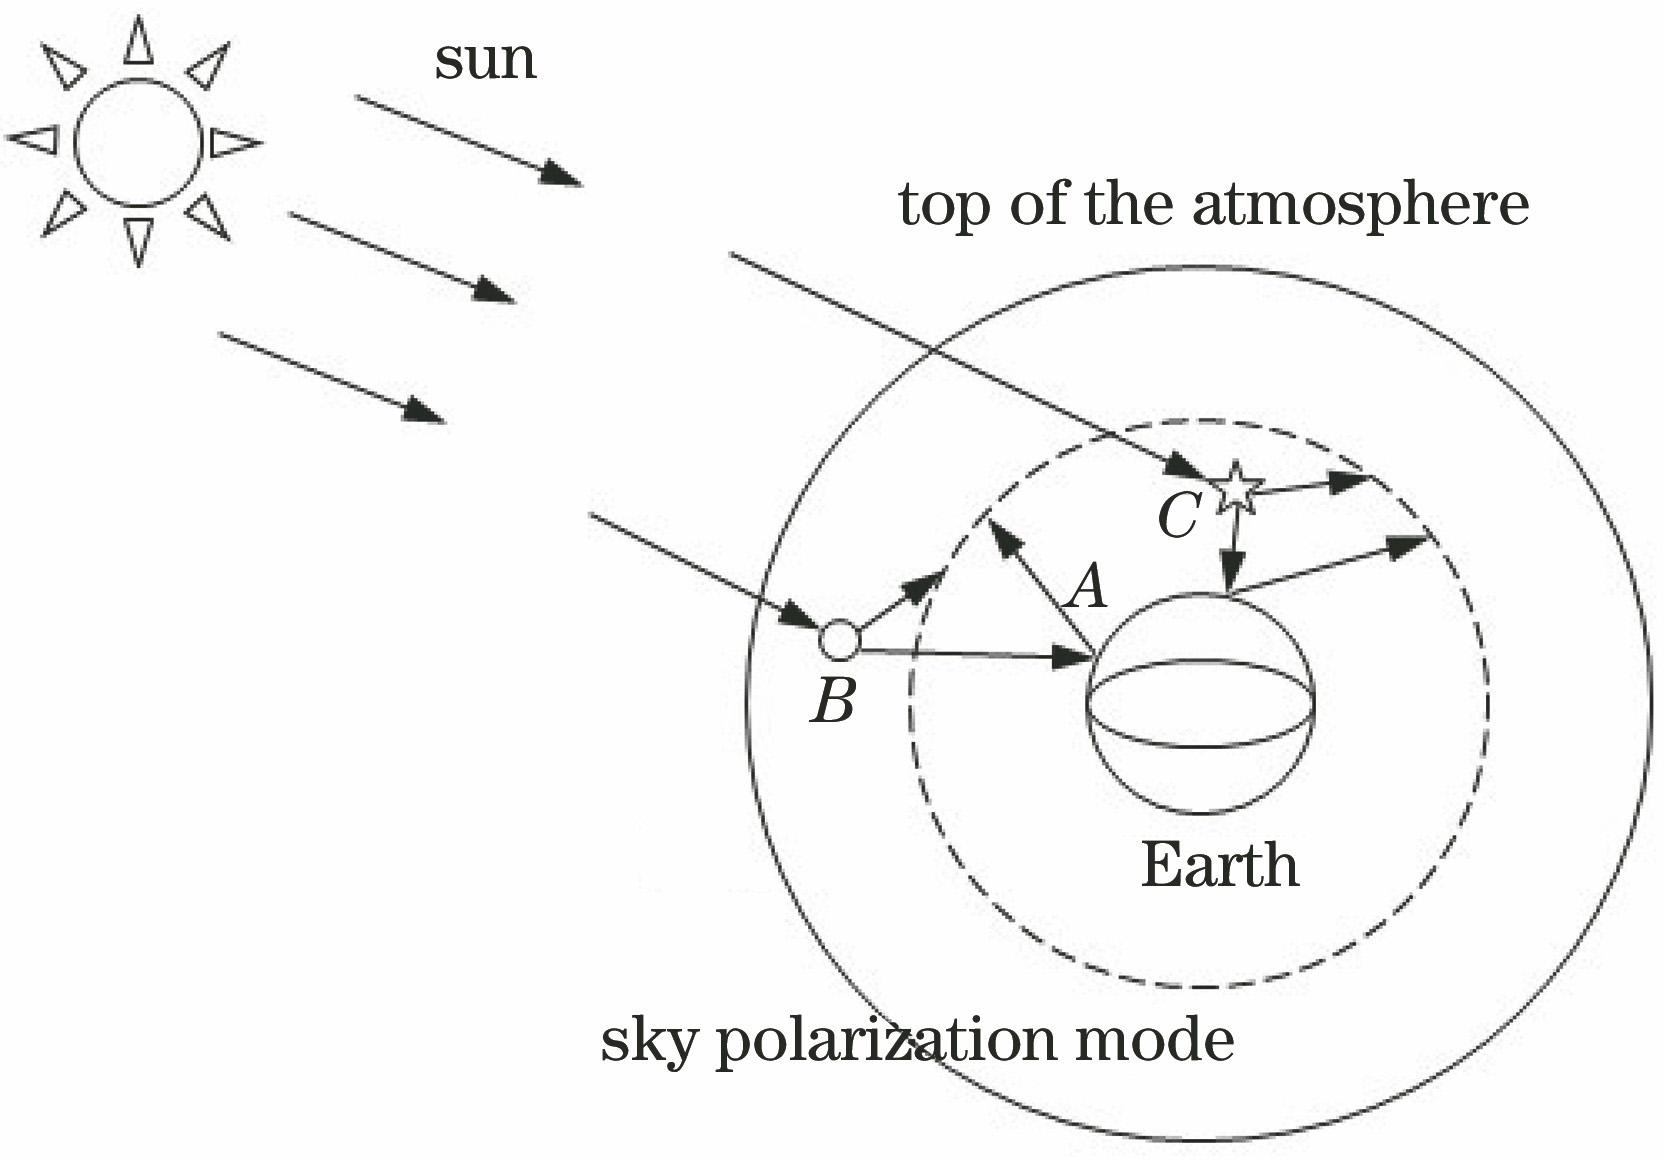 Schematic diagram of sky polarization mode formation[14]